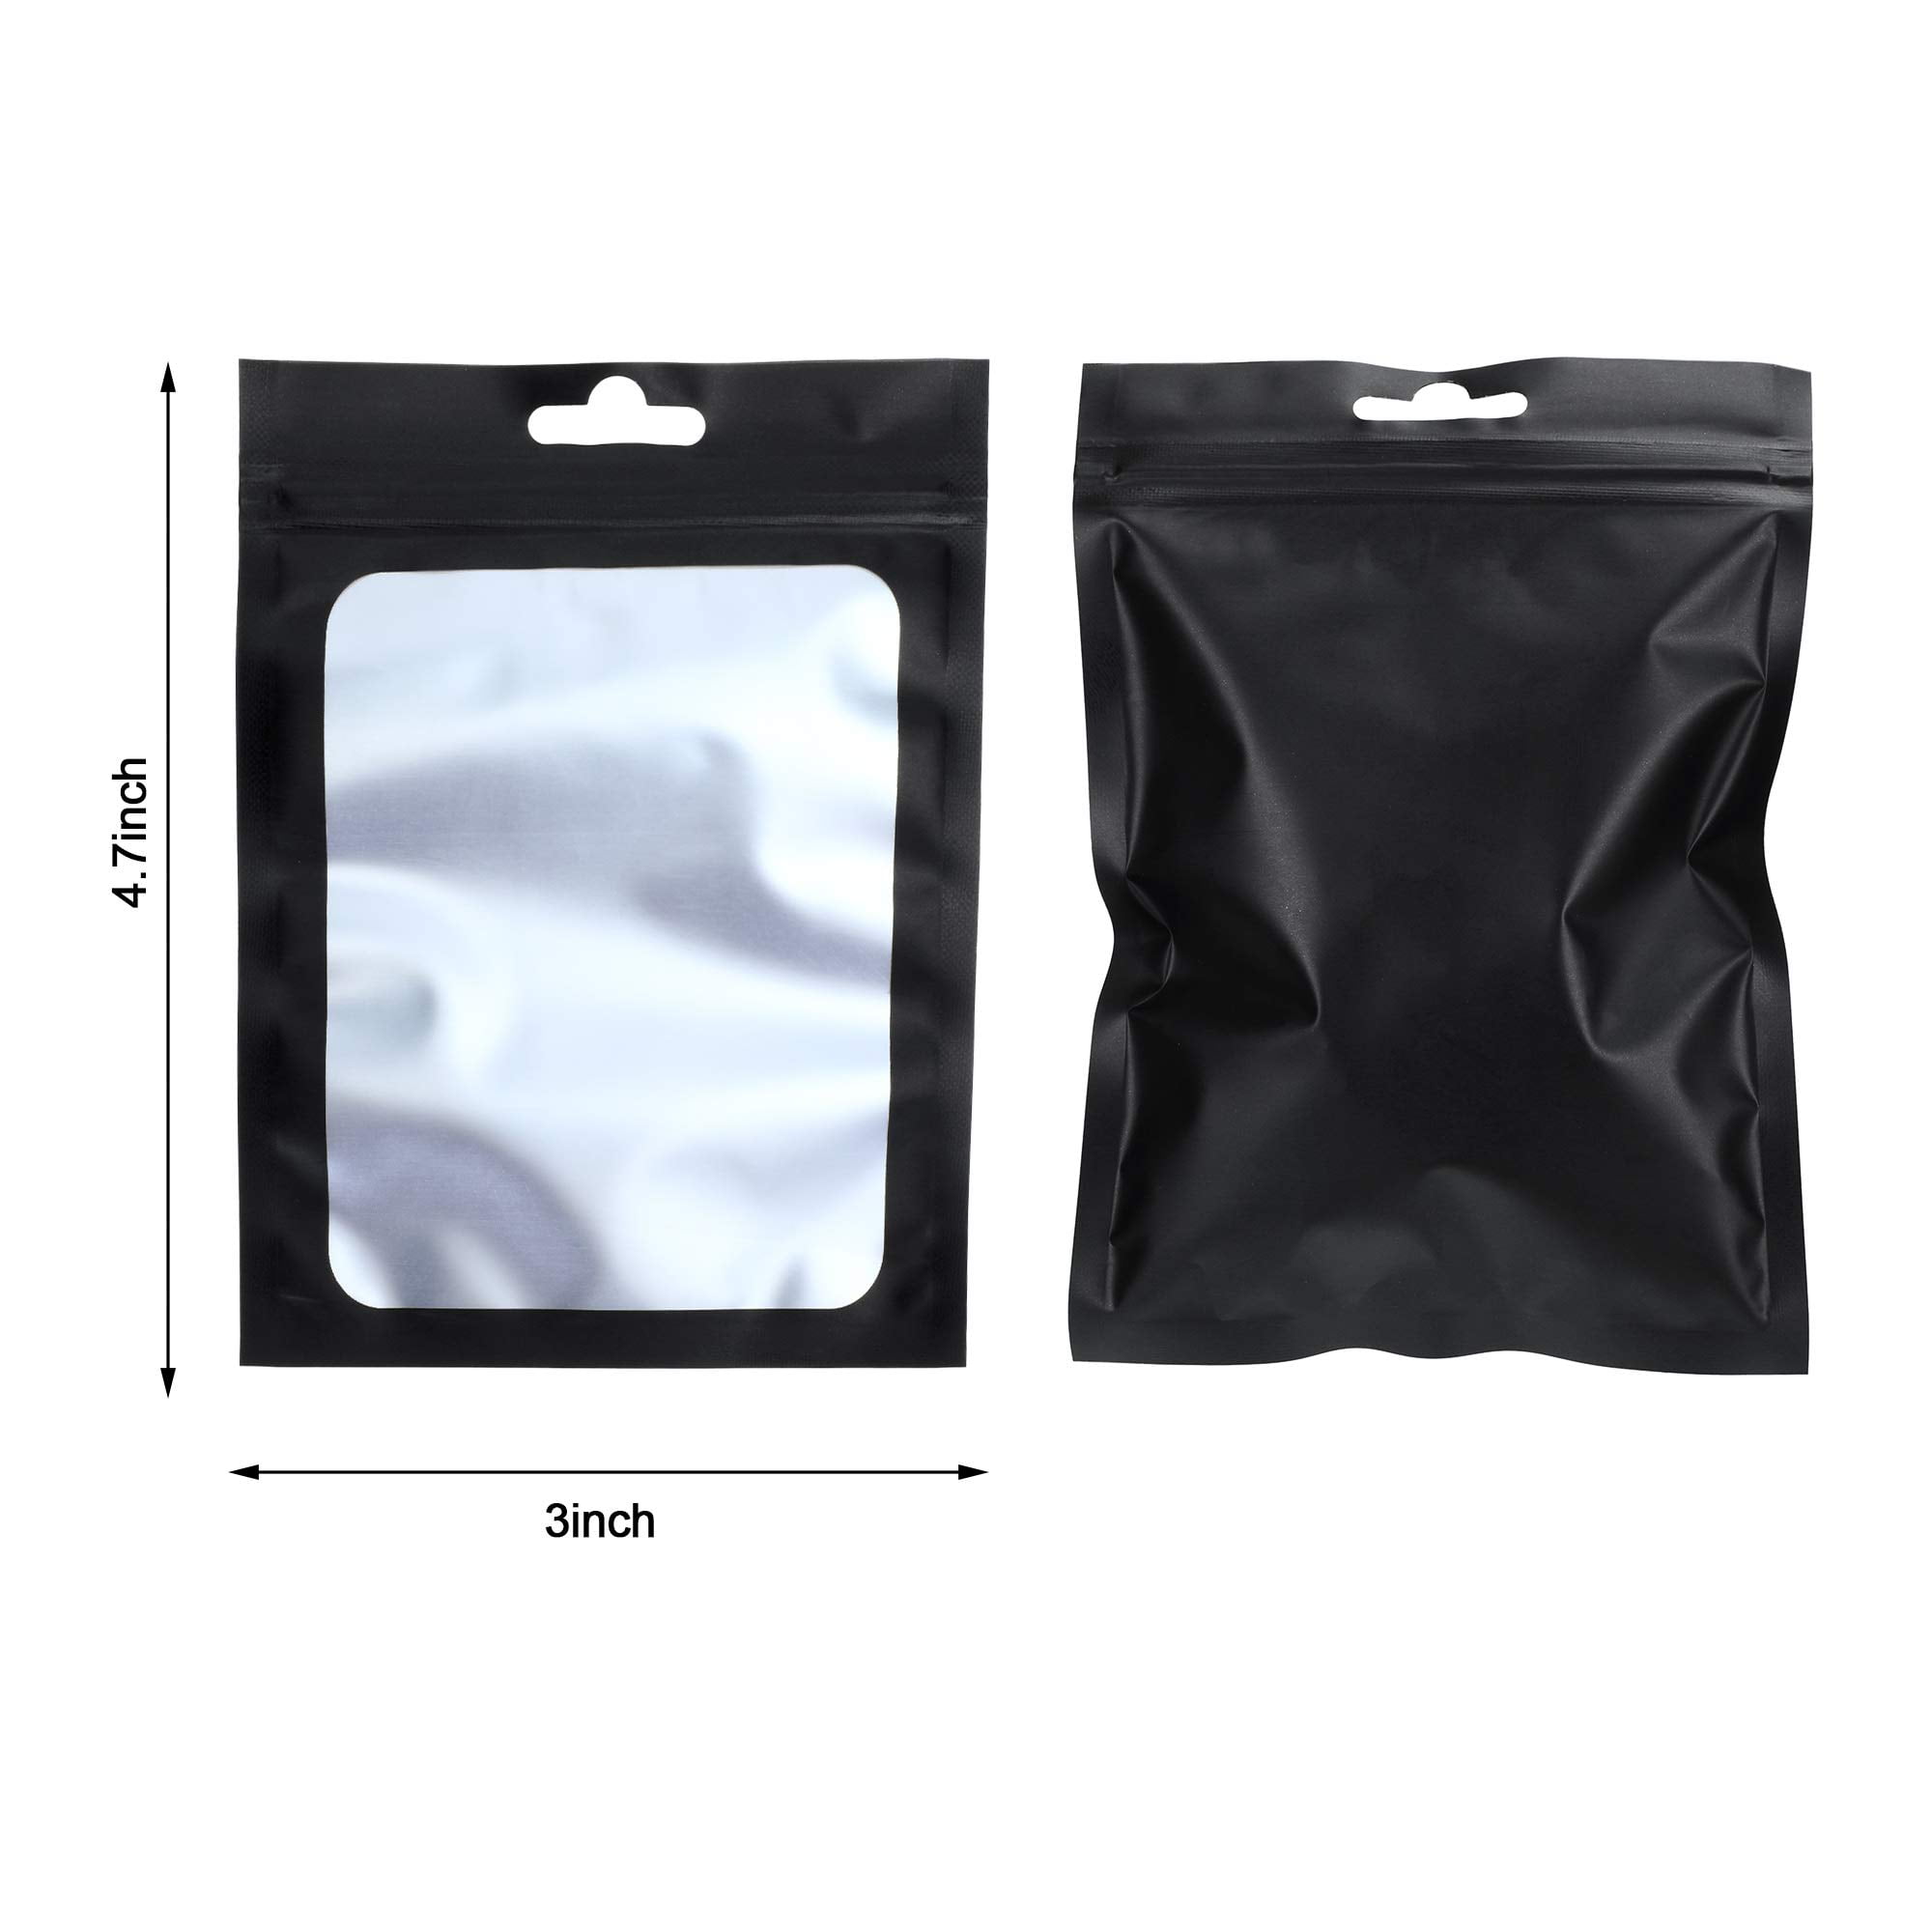 50 Pcs 1.5 Gallon Mylar Bags for Food Storage, Heat Sealable Bags Storage Bags for Food, Coffee Beans, Tea, Grains, etc. (11.8 x 15.7 inch )